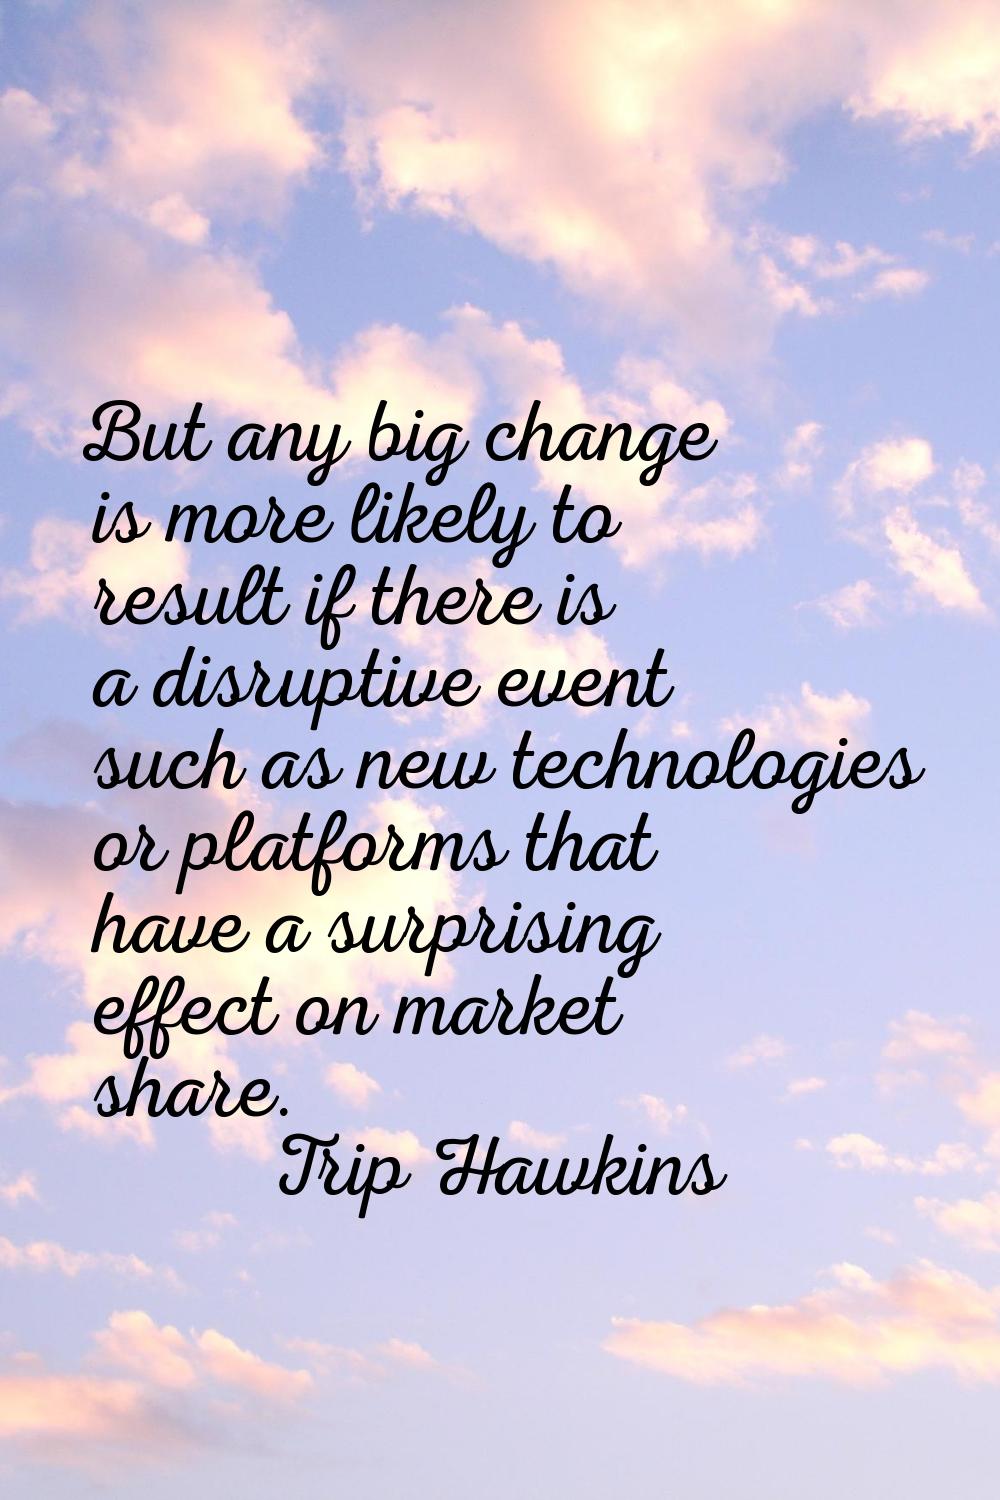 But any big change is more likely to result if there is a disruptive event such as new technologies